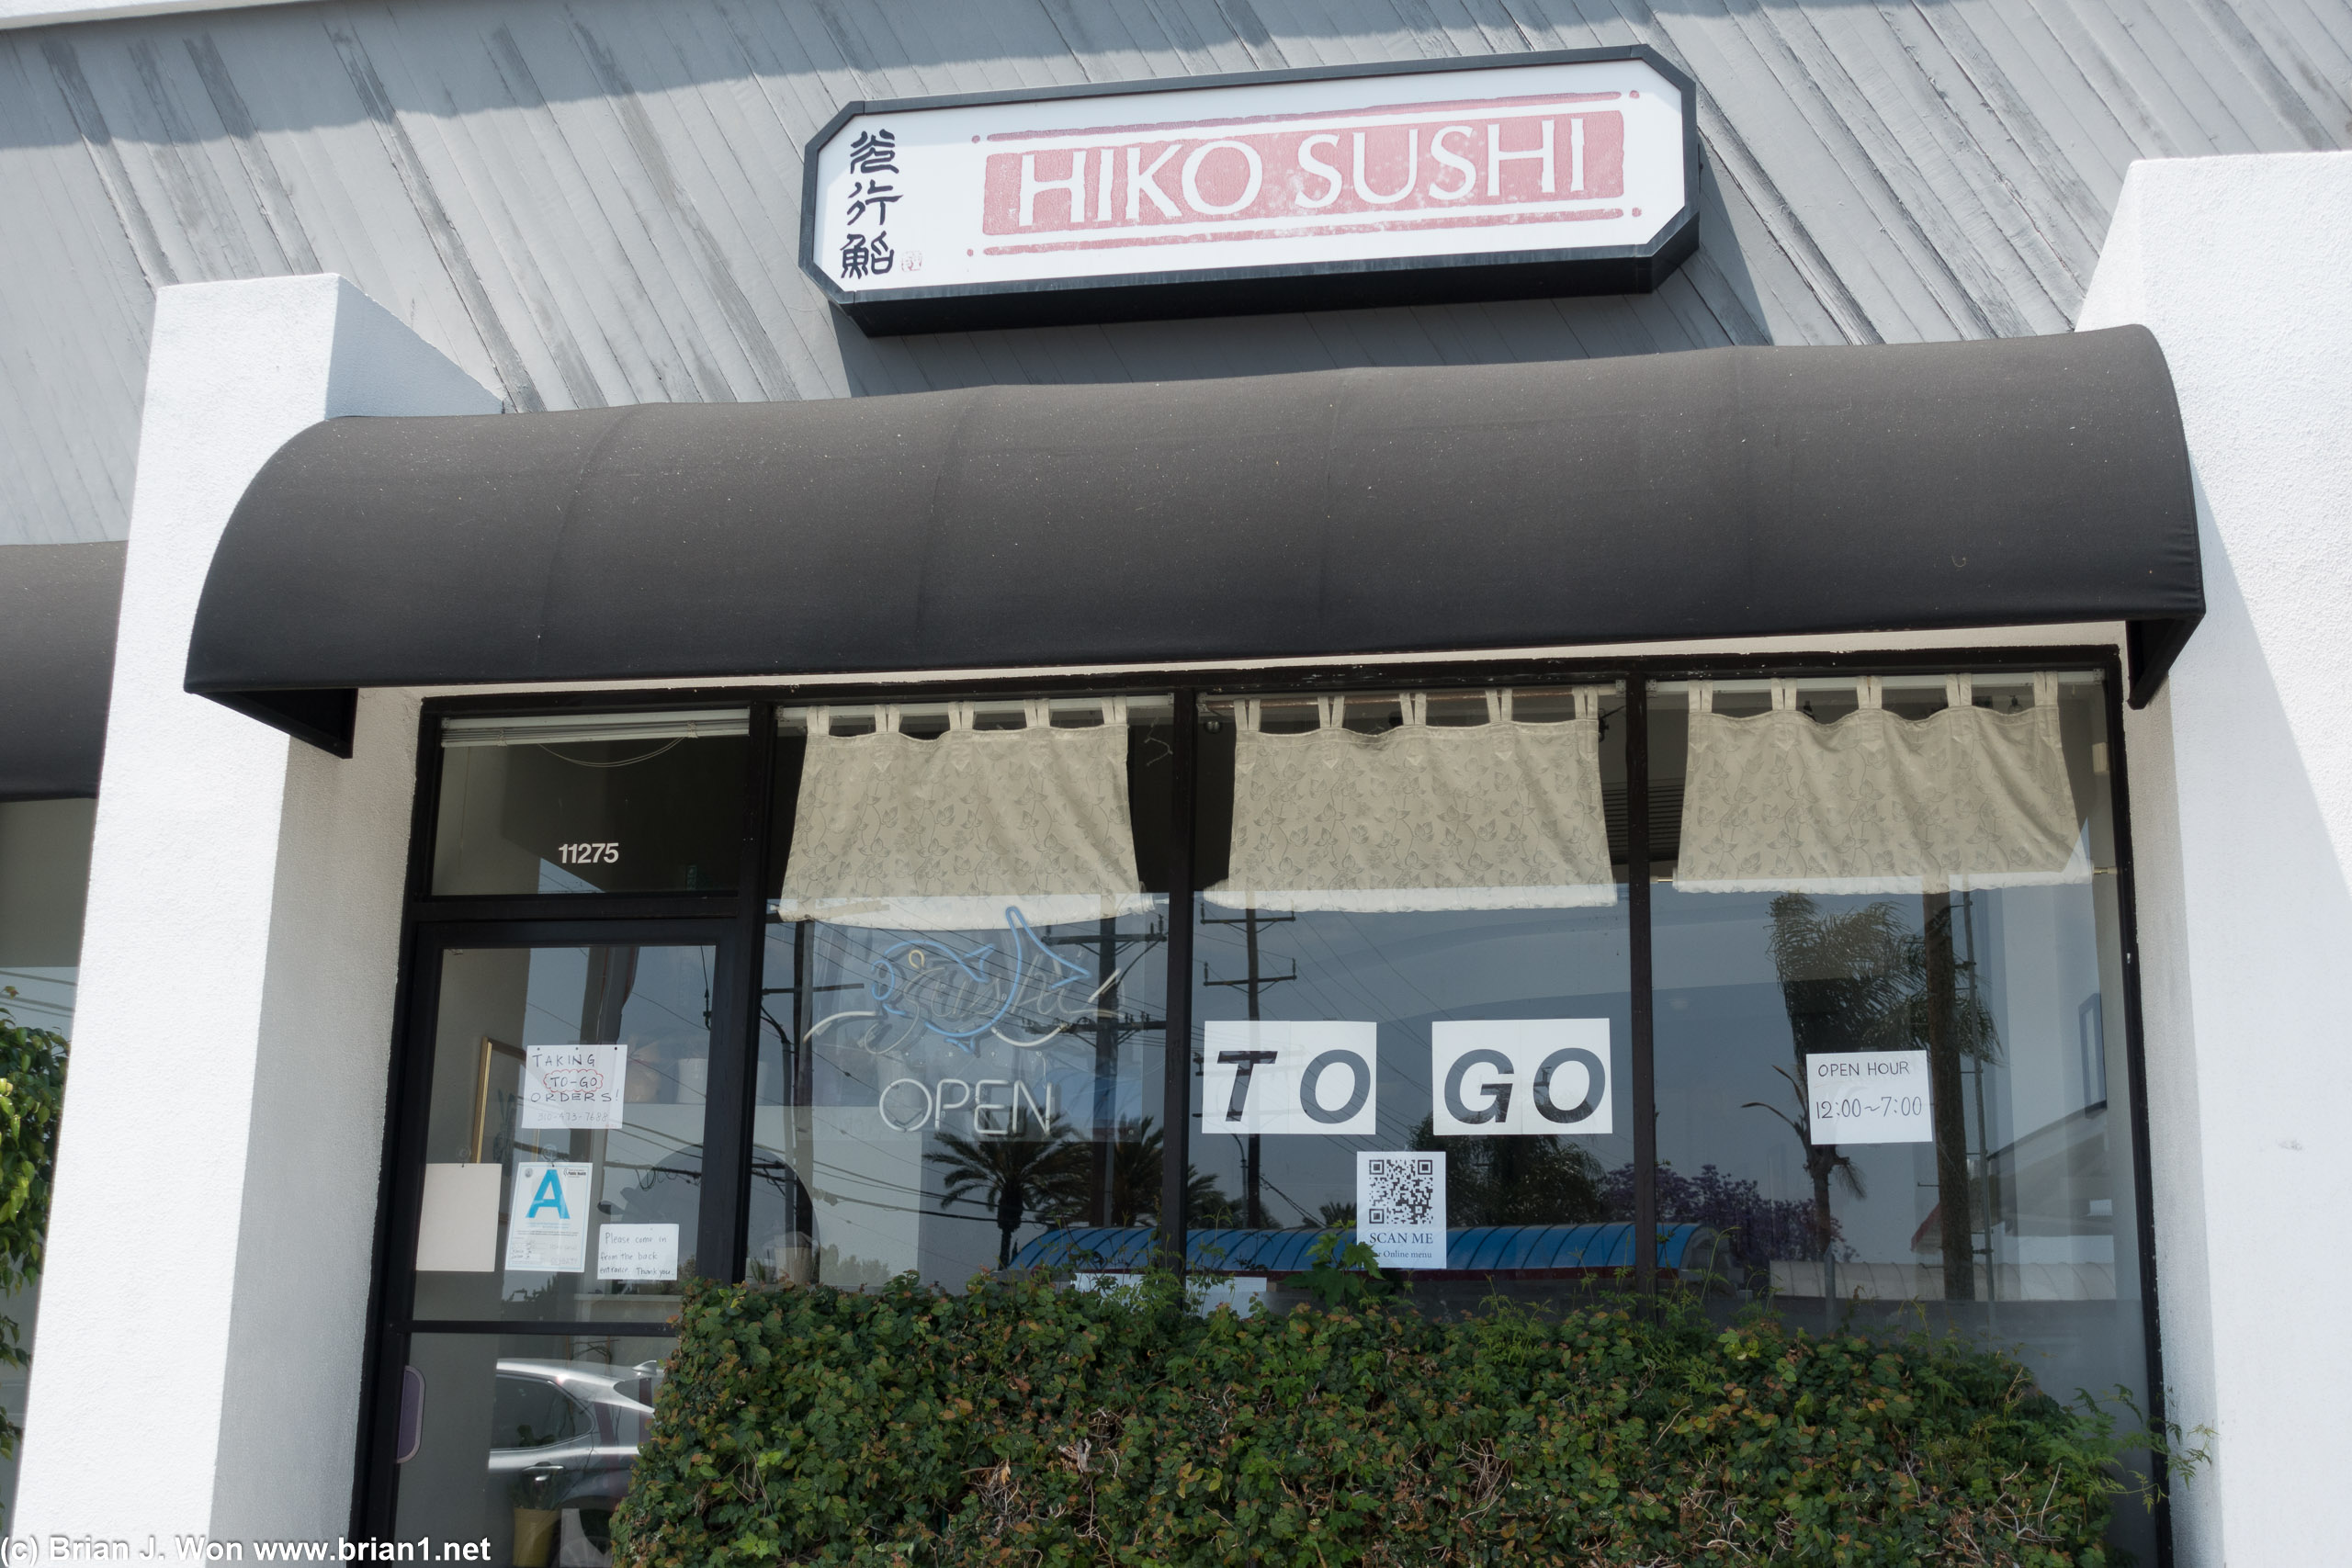 Hiko Sushi is now doing to-go.